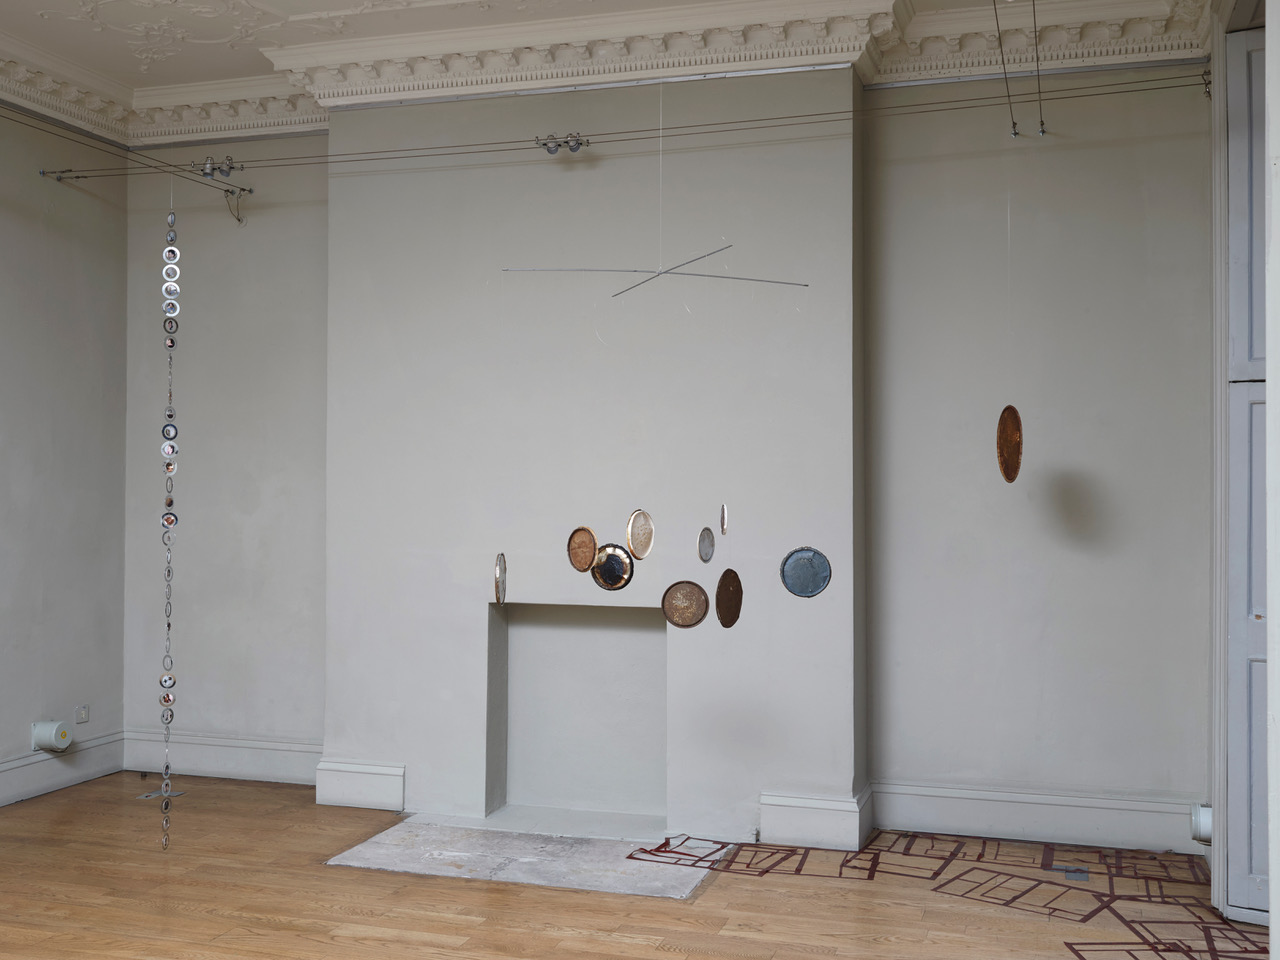 Nicky Hirst 'The Electorate' installation view, photography by Andy Keate